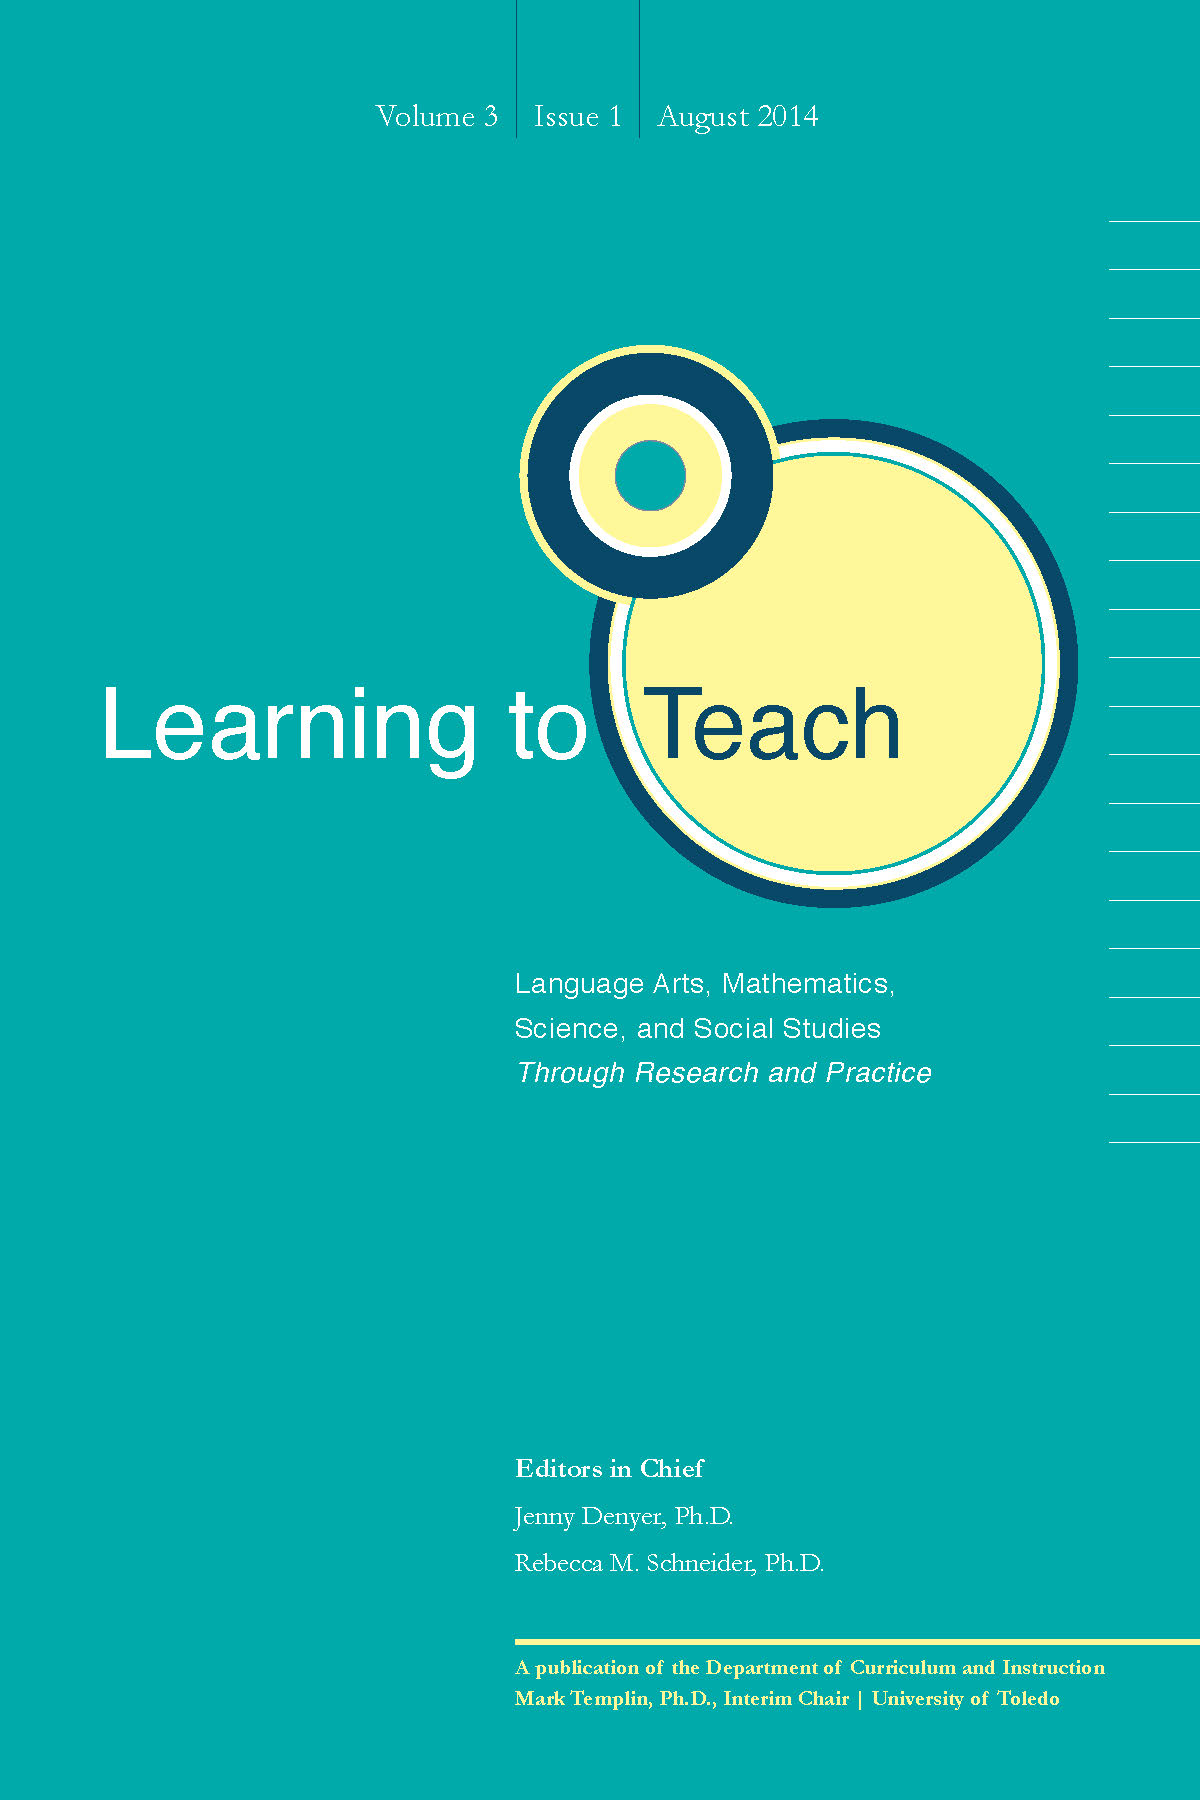 					View Vol. 3 No. 1 (2014): Learning to Teach Language Arts, Mathematics, Science, and Social Studies Through Research and Practice
				